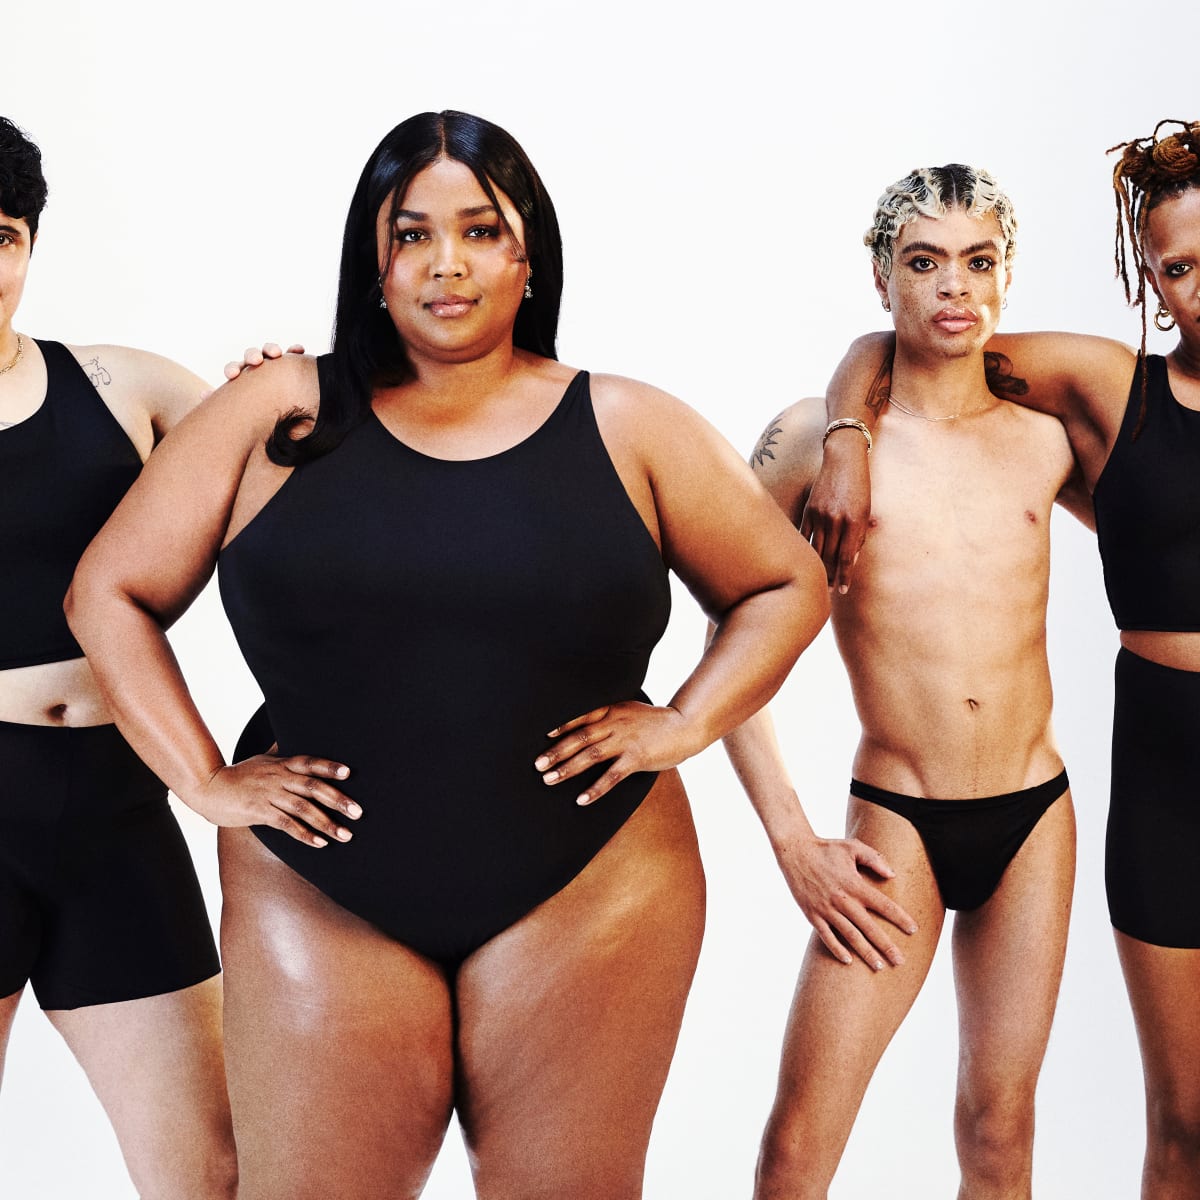 Gender-Affirming Underwear Brand Urbody Calls Out Lizzo's Yitty